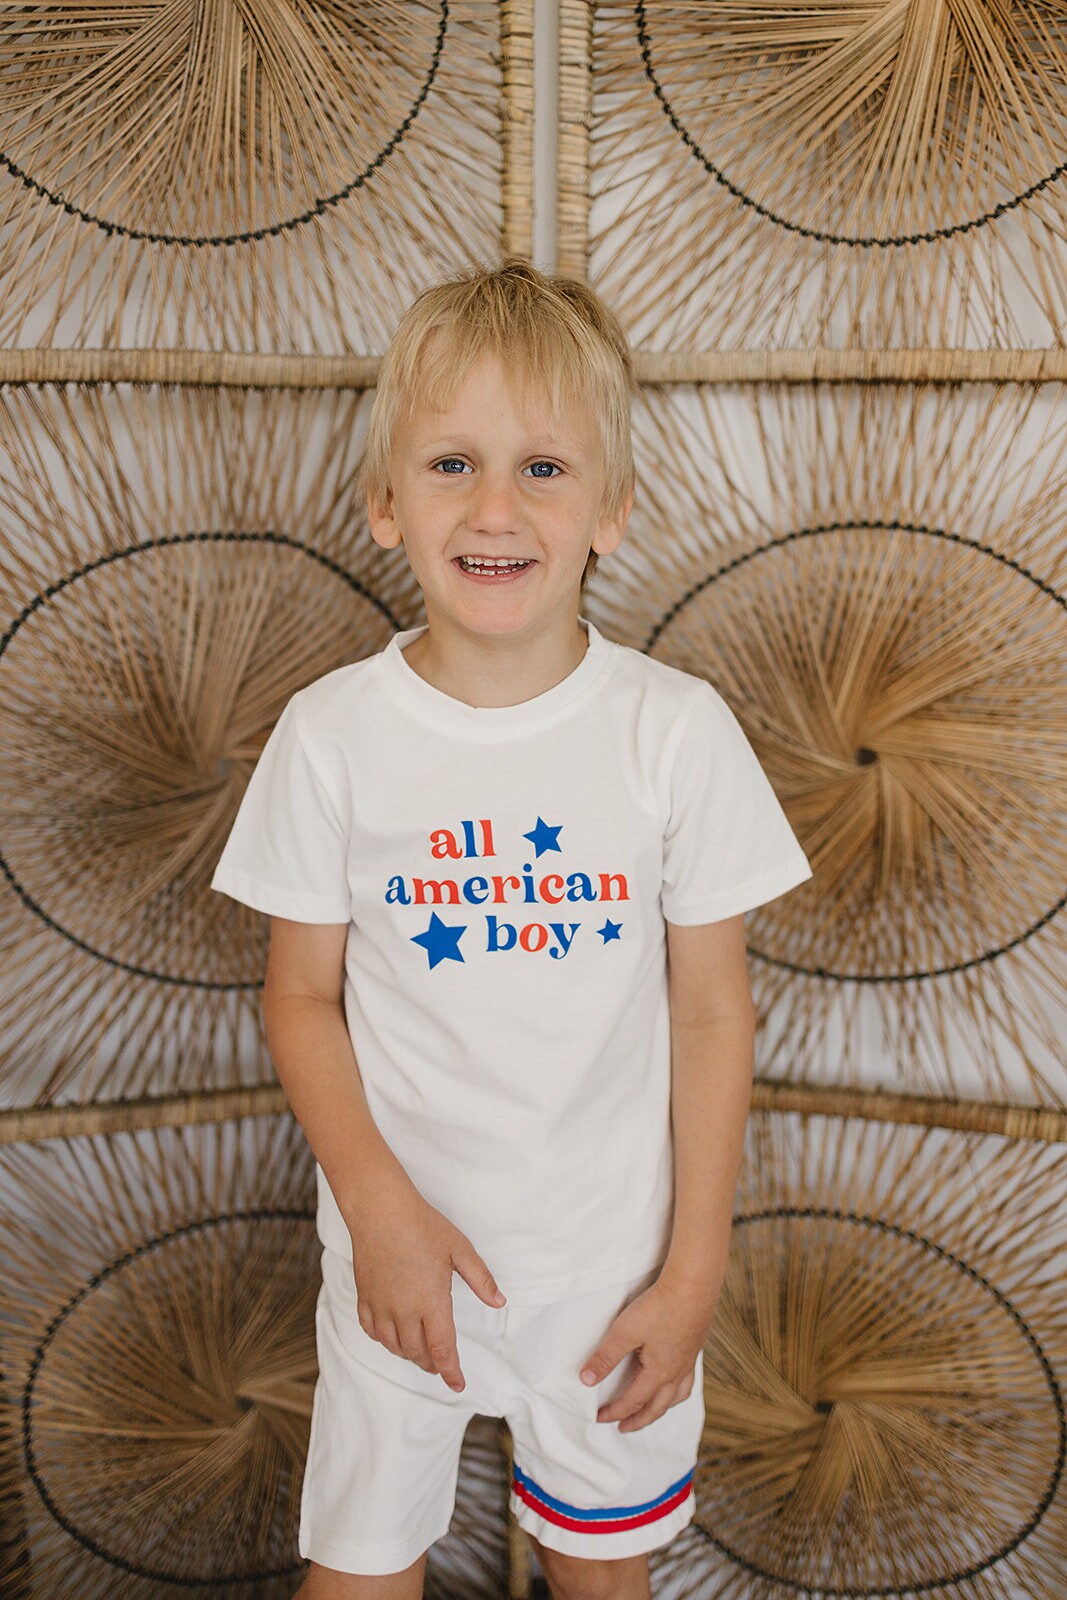 All American Boy T-Shirt - 4th of July Toddler Shirt - 4th of July Outfit - Red, White & Blue Patriotic Shirt - Toddler 4th of July - USA